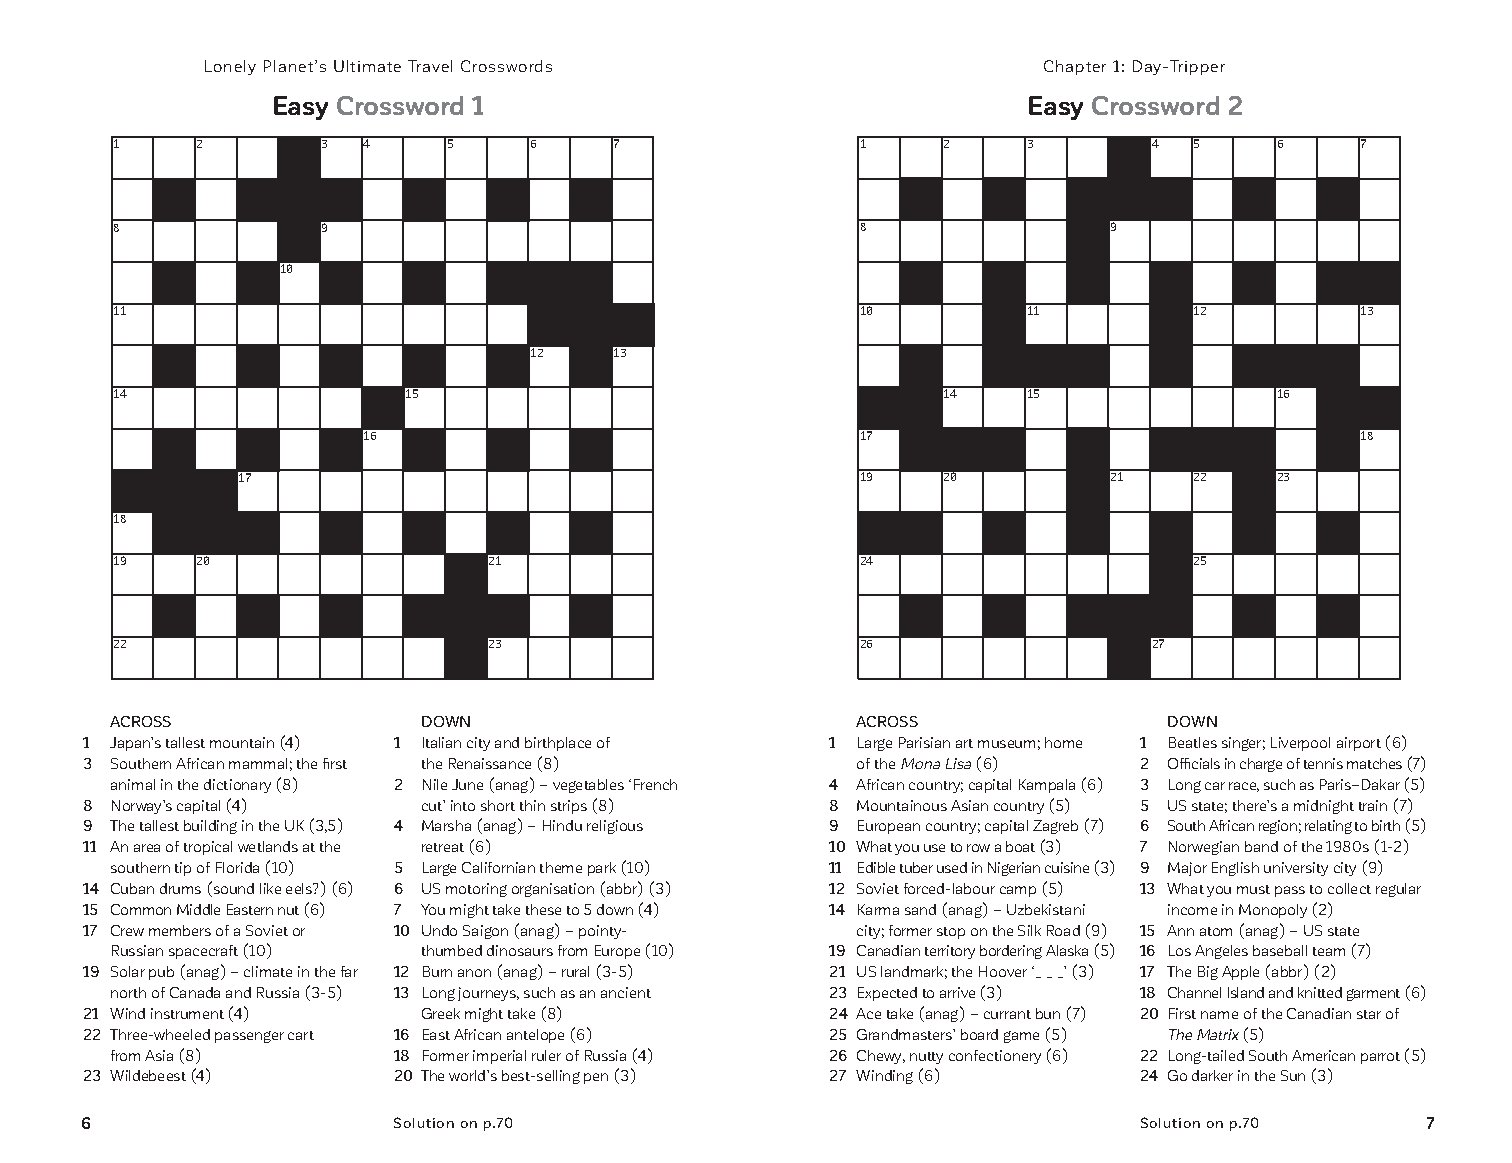 Lonely Planet's Ultimate Travel Crosswords 1